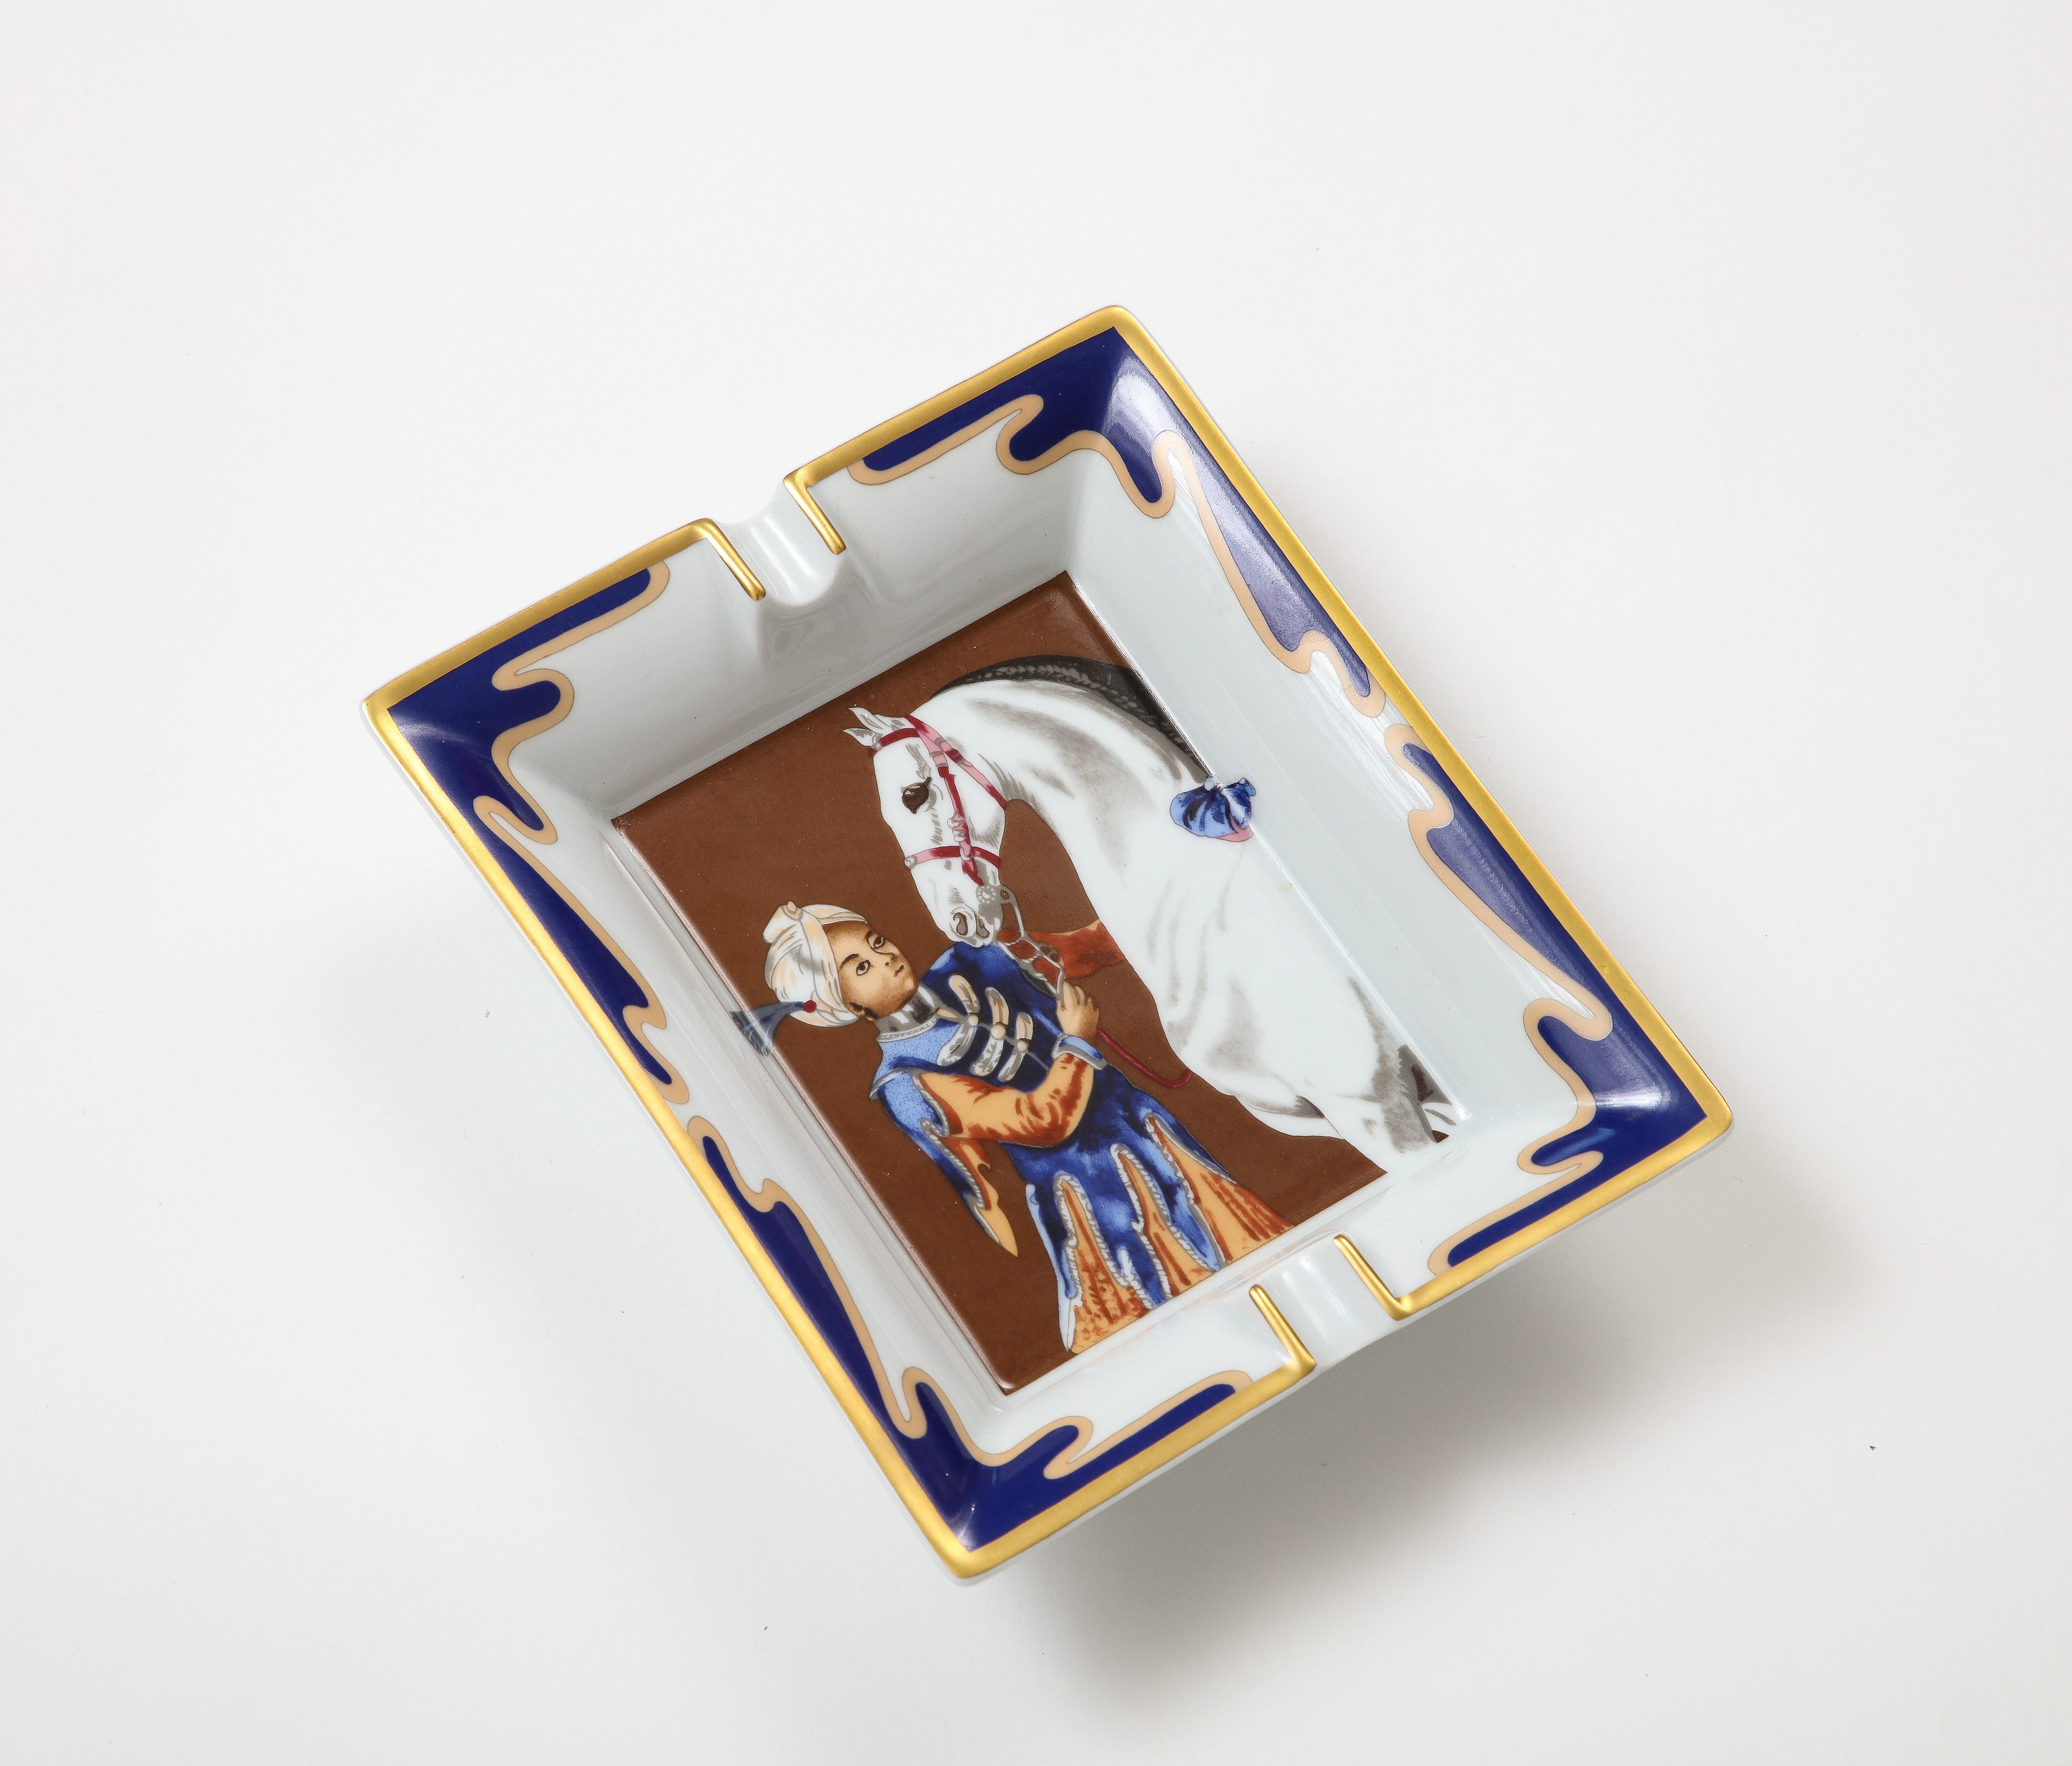 Vintage porcelain ashtray or catchall by Hermes, made in France. The porcelain tray features a man with a horse in the vertical orientation, framed with a lovely blue border with gold trim.